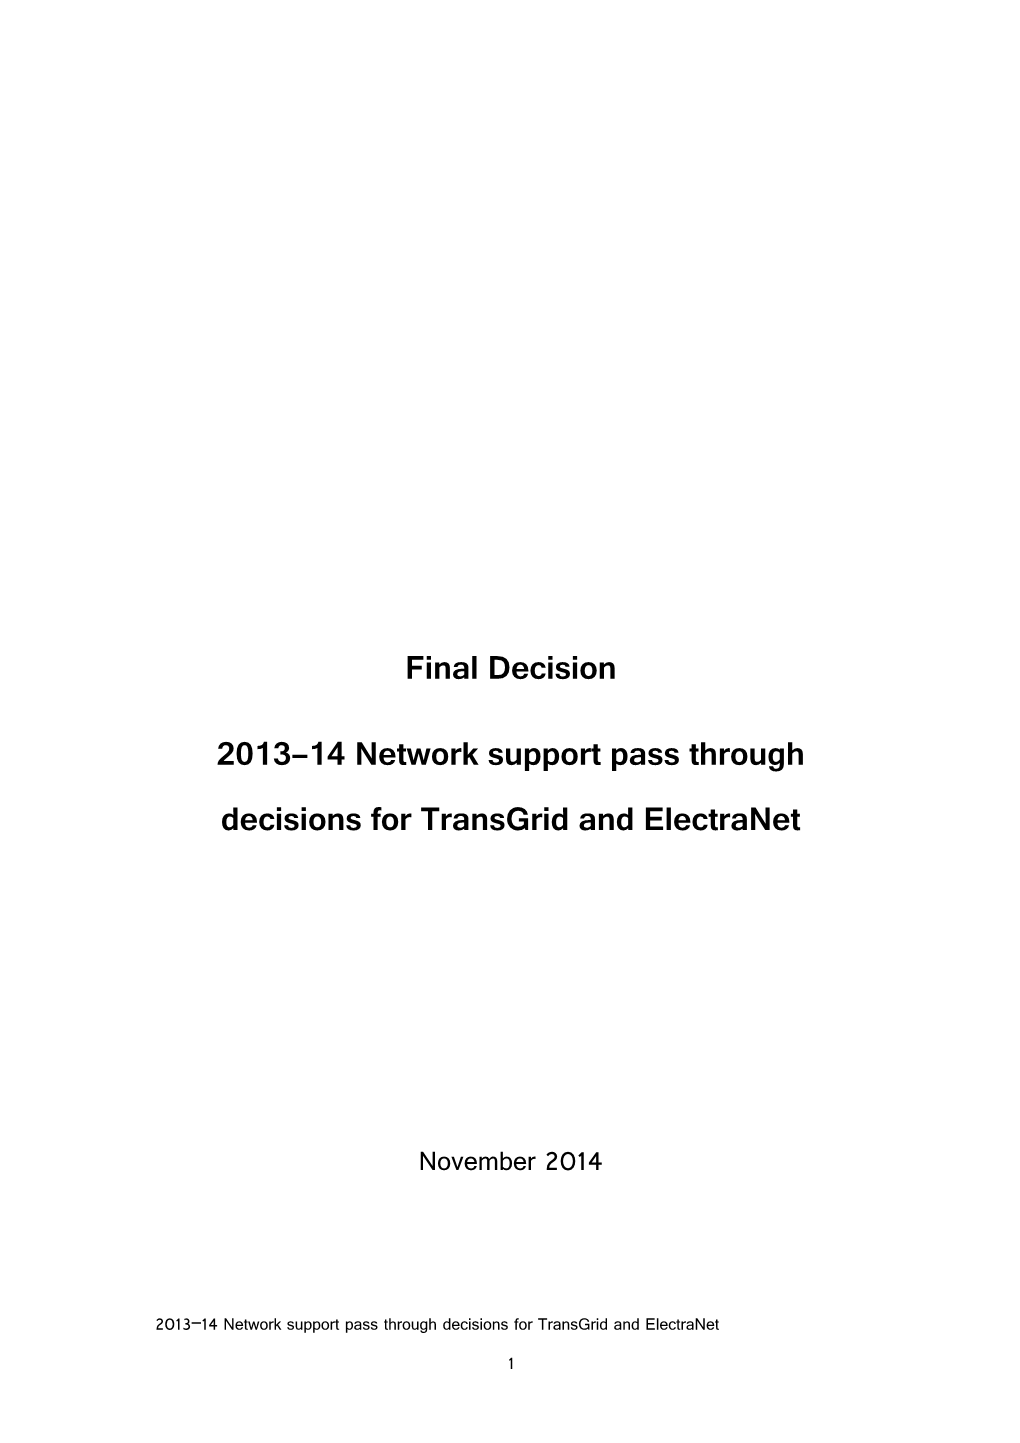 2013 14 Network Support Pass Through Decisions for Transgrid Andelectranet